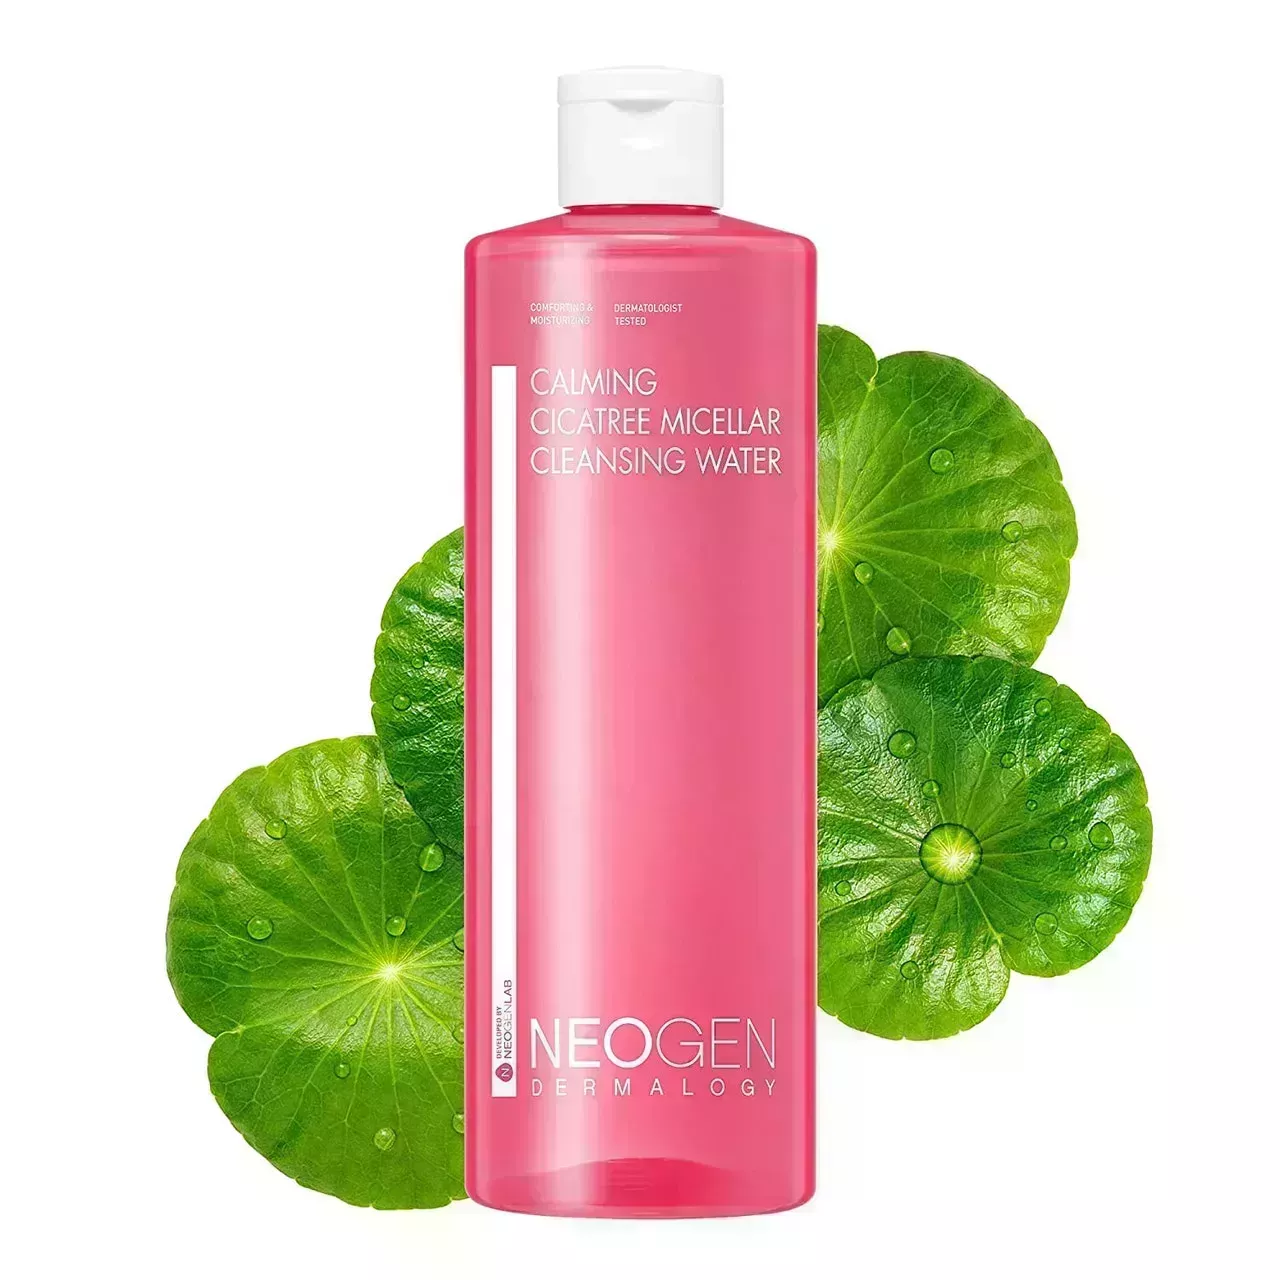 Neogen Dermalogy Calming Cicatree Micellar Cleansing Water with green leaves on white background